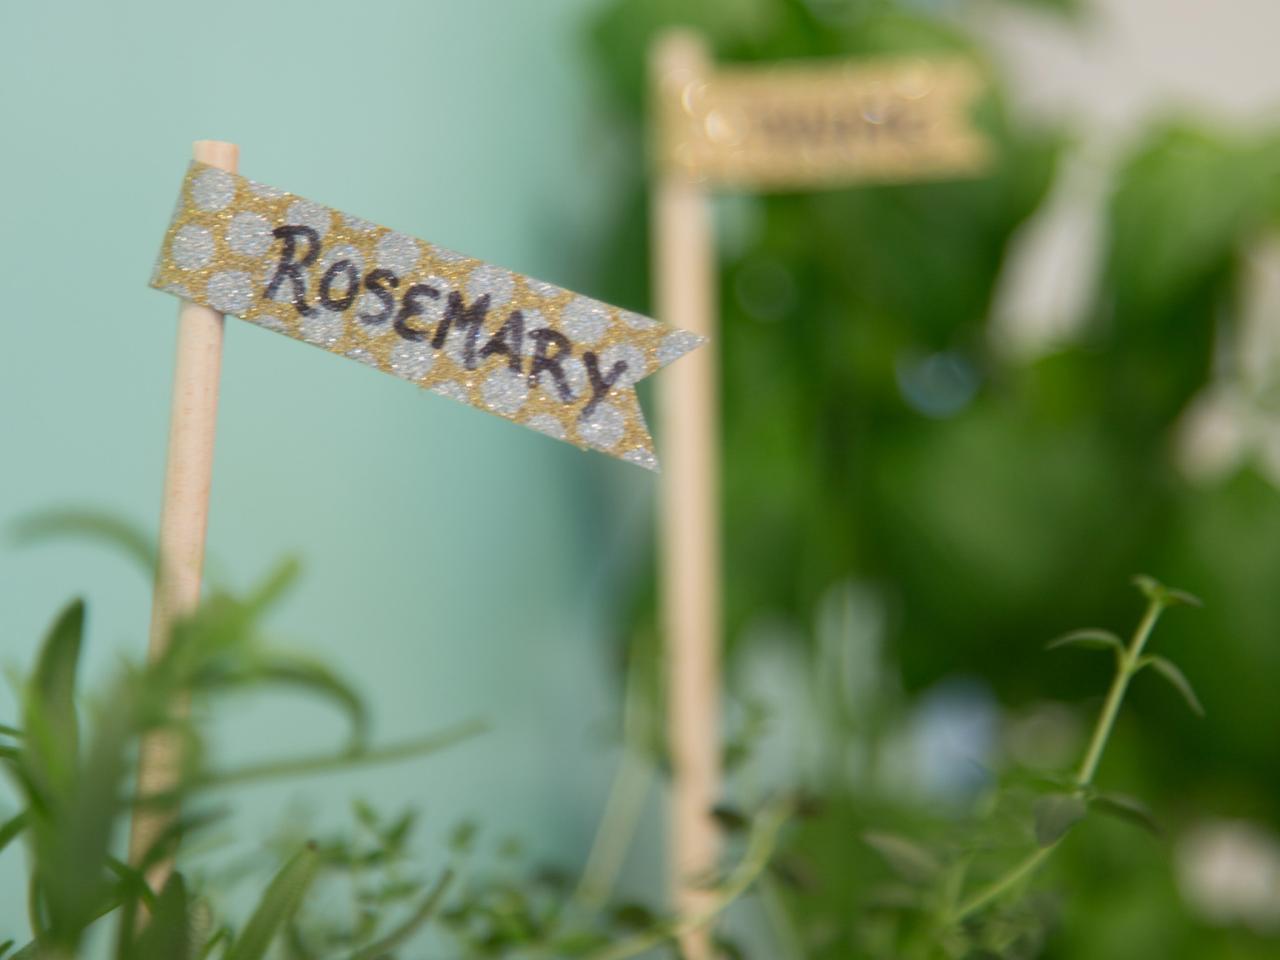 Make your garden even cuter with labels. Source: HGTV